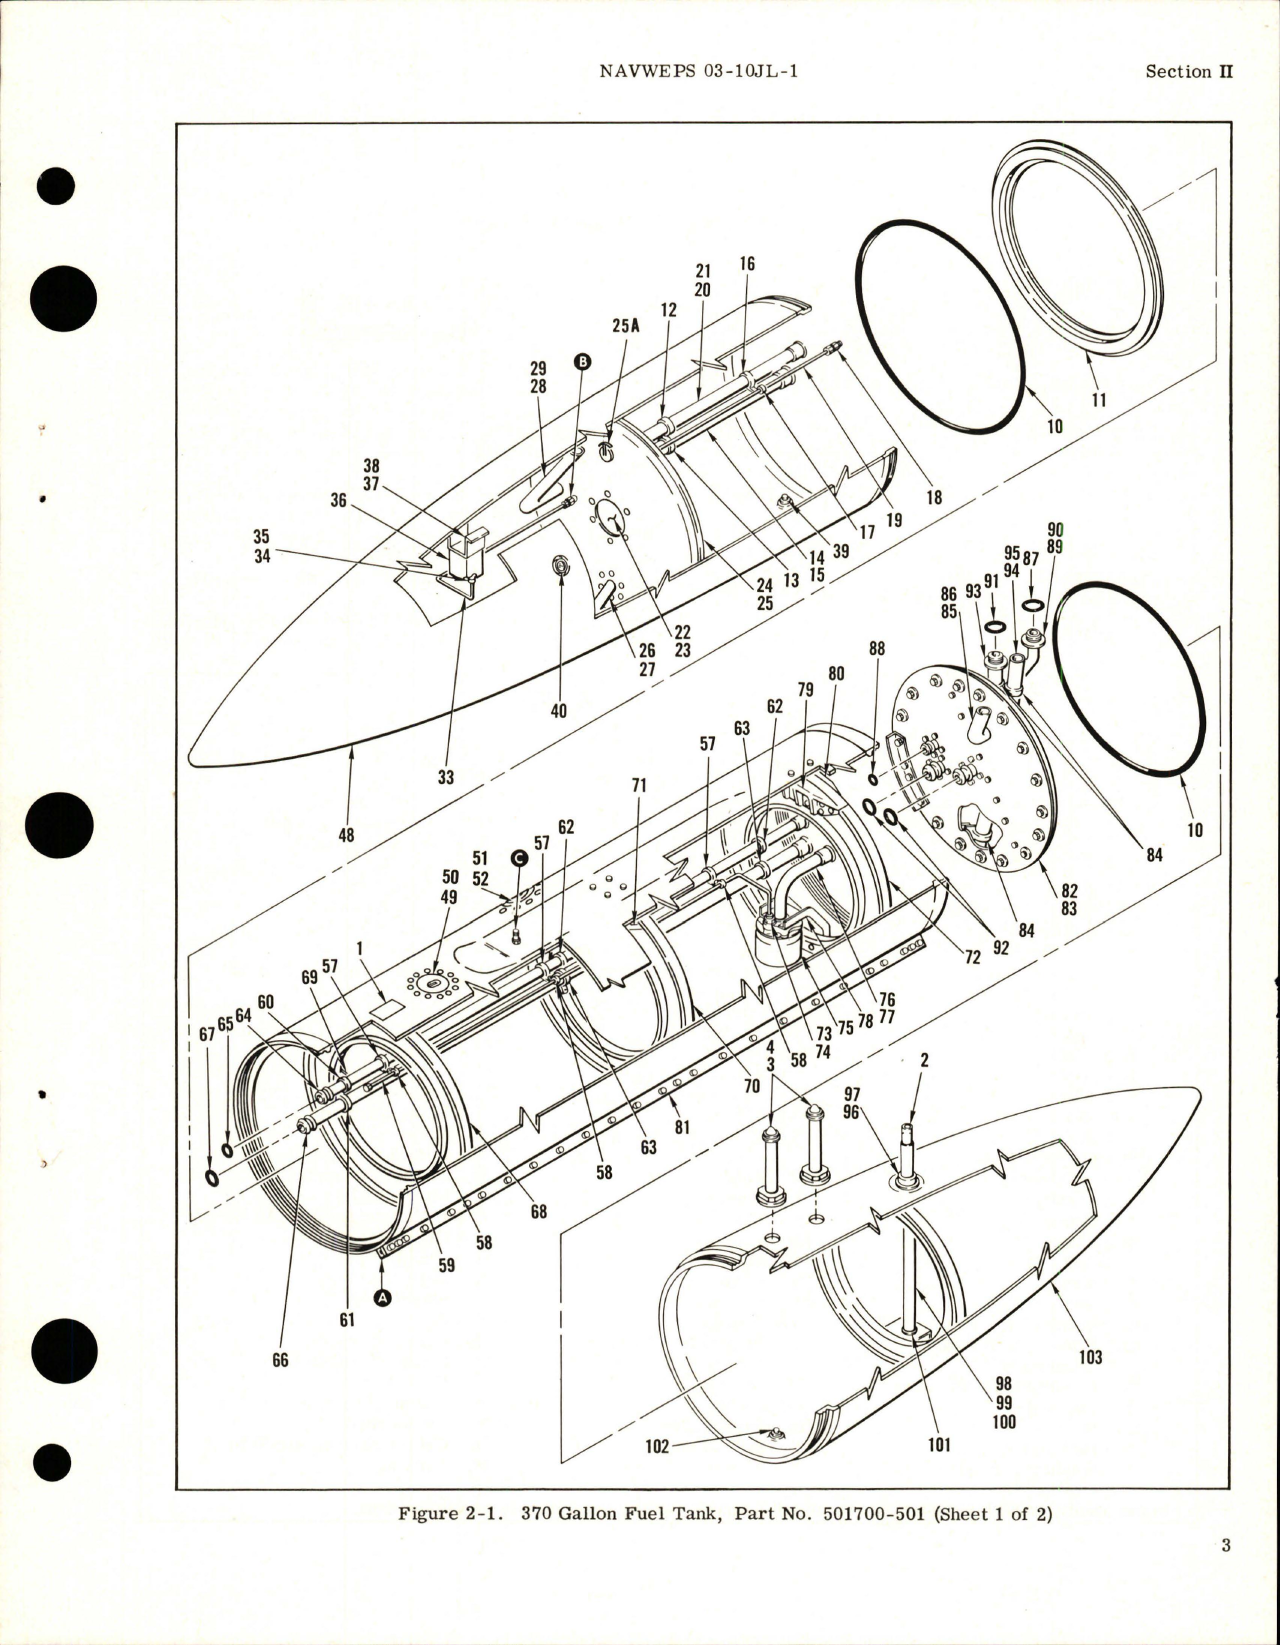 Sample page 7 from AirCorps Library document: Overhaul Instructions for Fuel Tanks - 370 Gallon - Parts 501700 and 501700-501